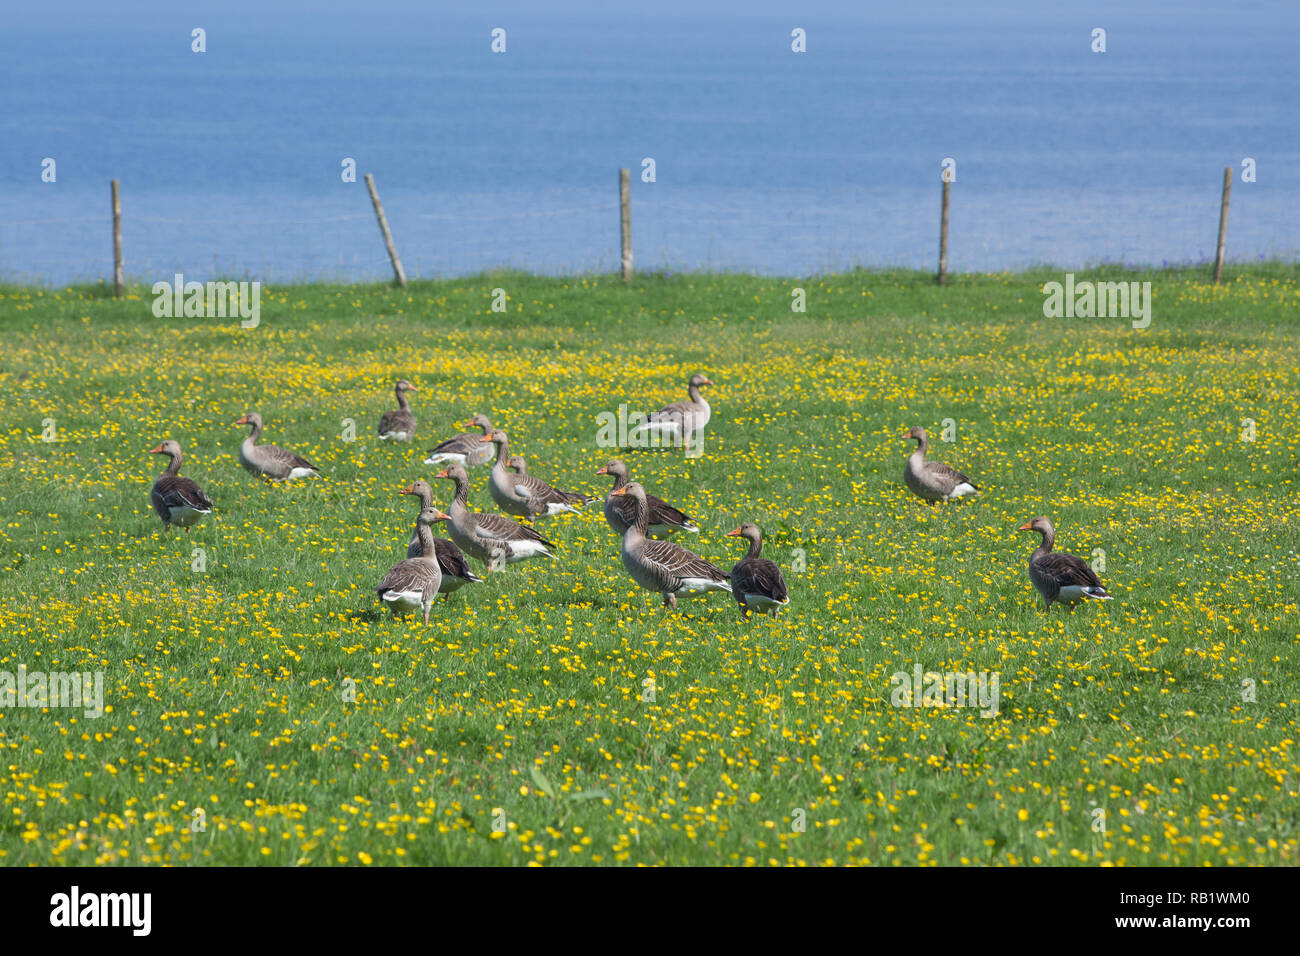 Western Greylag Geese (Anser anser). Part of the resident wild breeding population. Here a flock of failed or none breeding birds,  June. In a grazing pasture, including Buttercups (Ranunculus repens). Mull. Stock Photo